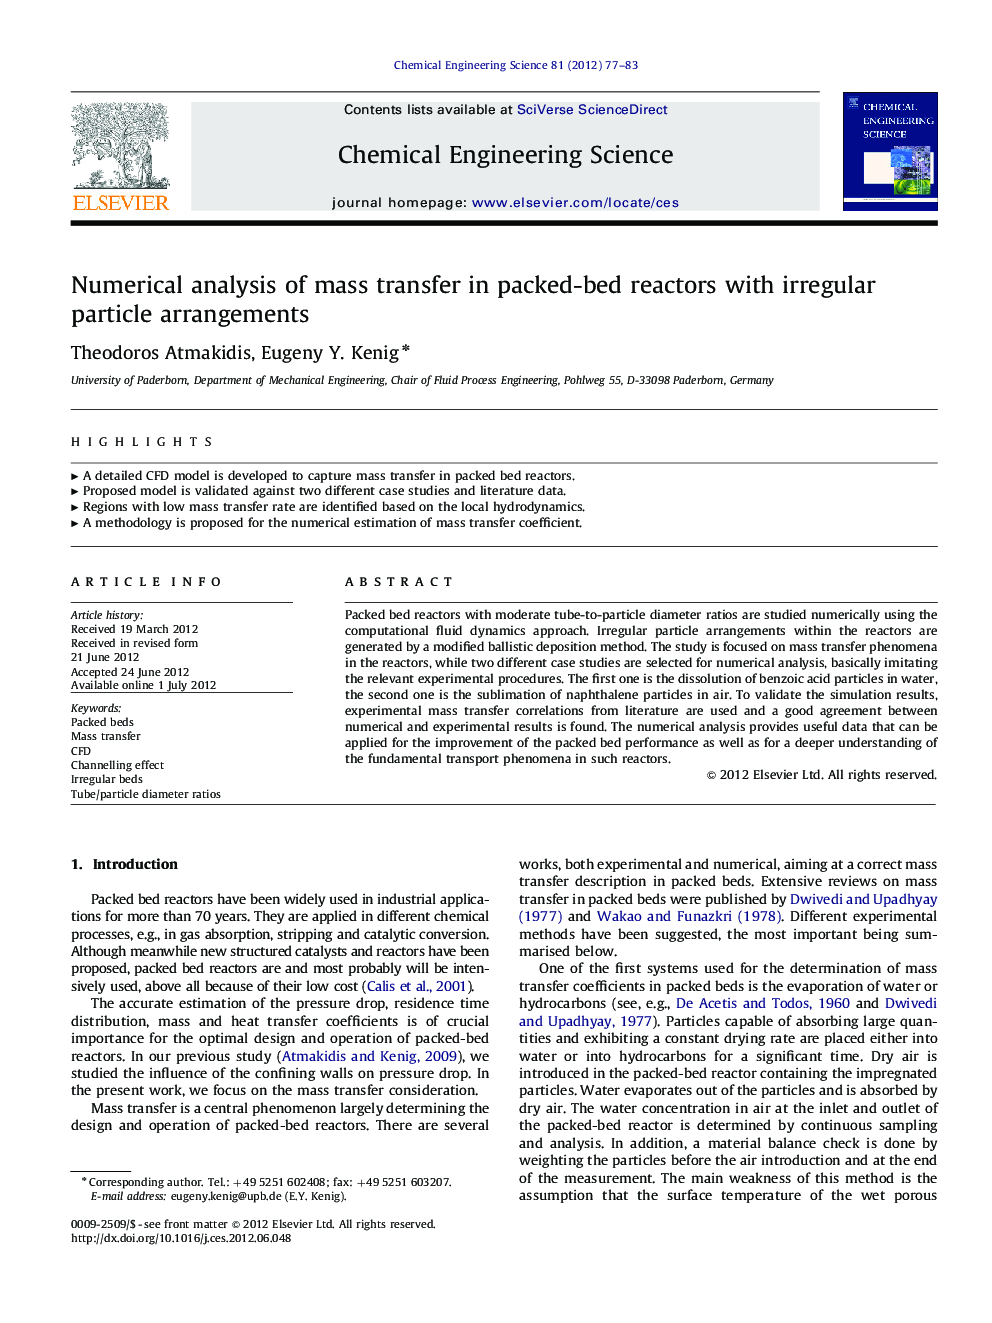 Numerical analysis of mass transfer in packed-bed reactors with irregular particle arrangements